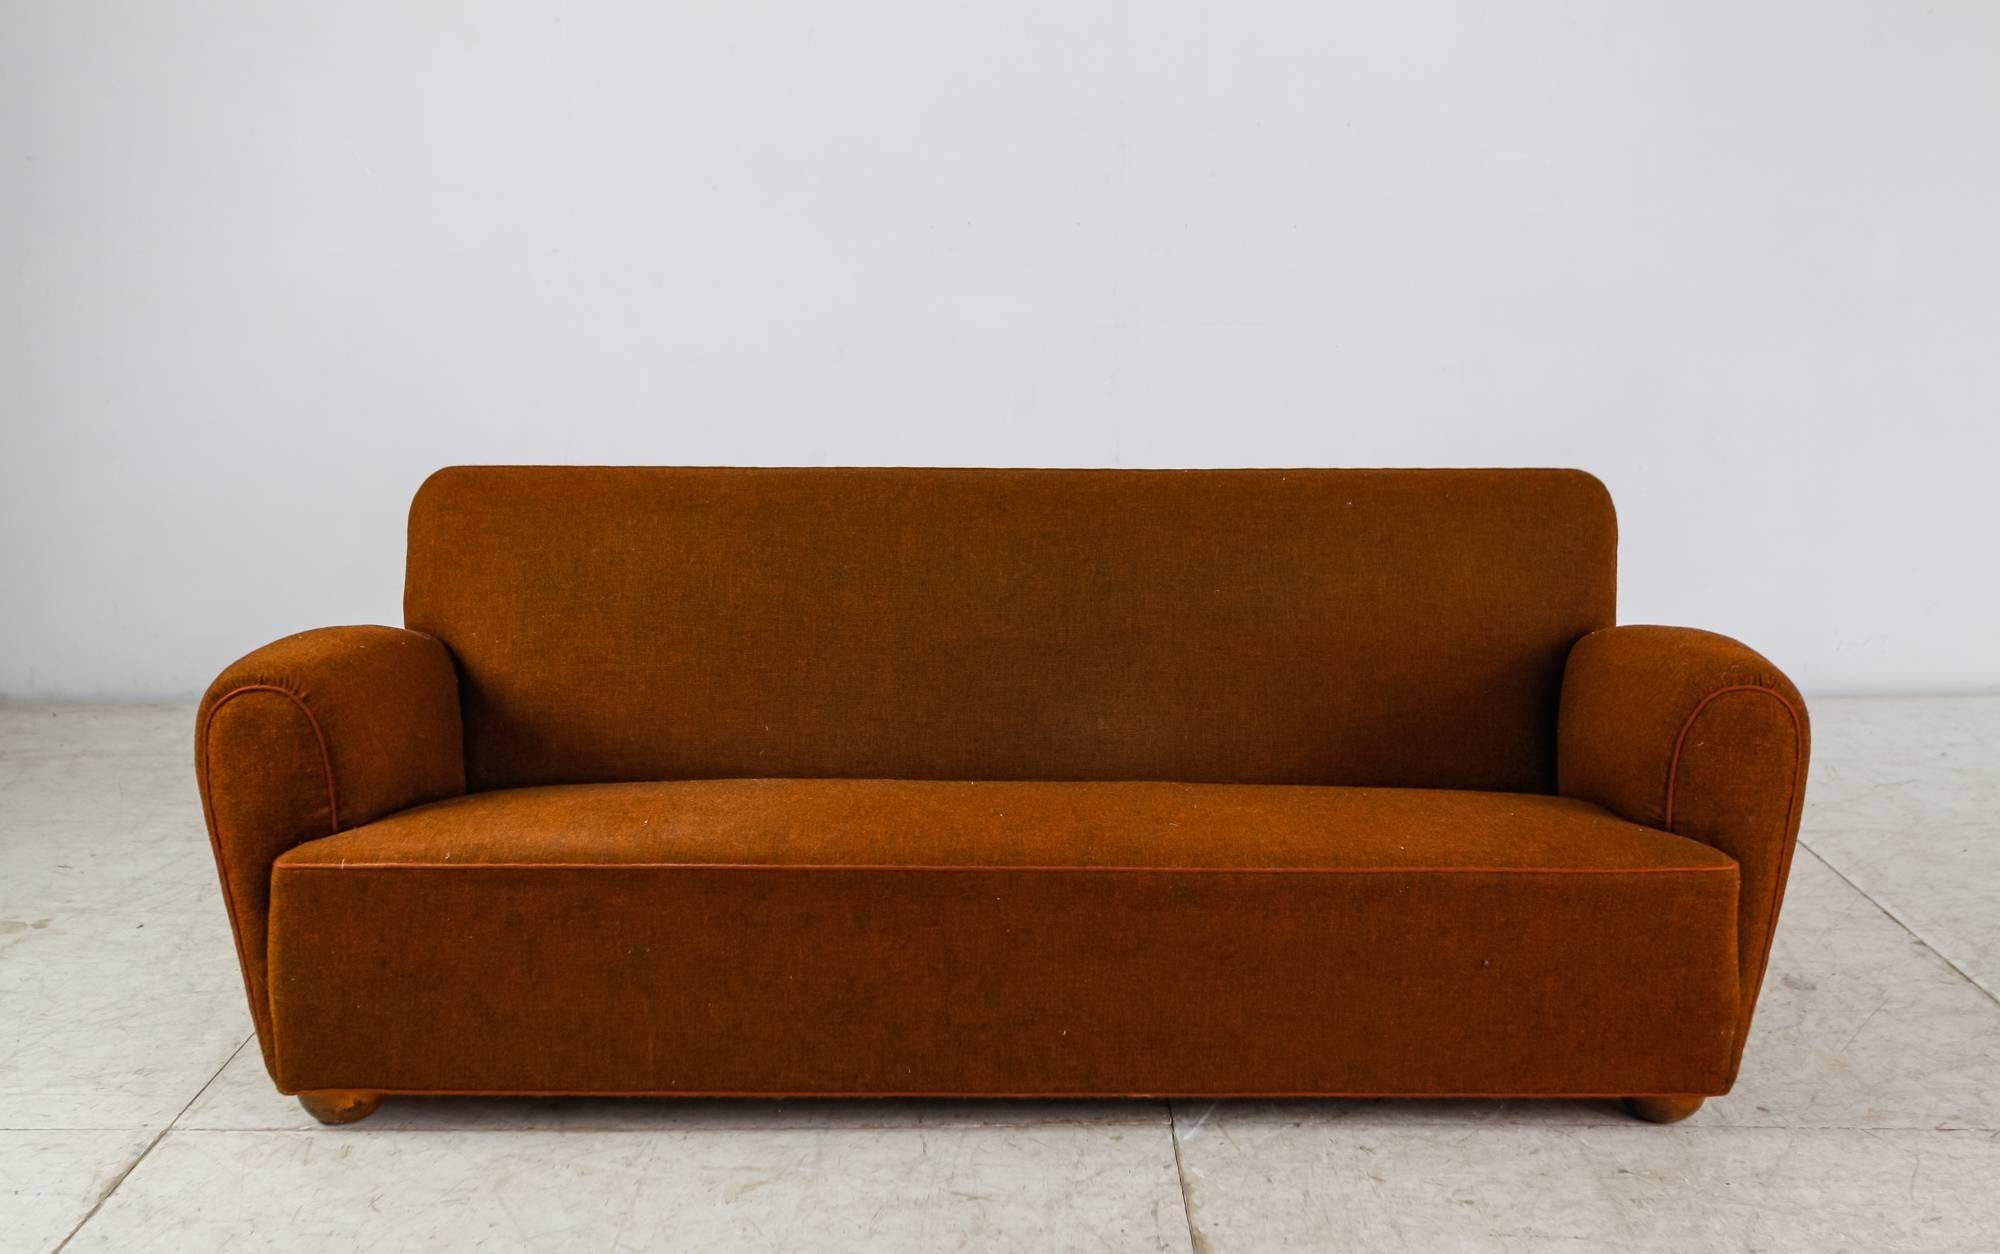 A three-seat sofa with a brown wool upholstery, standing on stained beech feet. The sofa has a wonderful round shape and is structurally still in an excellent condition, but the upholstery has wear. It can be professionally reupholstered in our